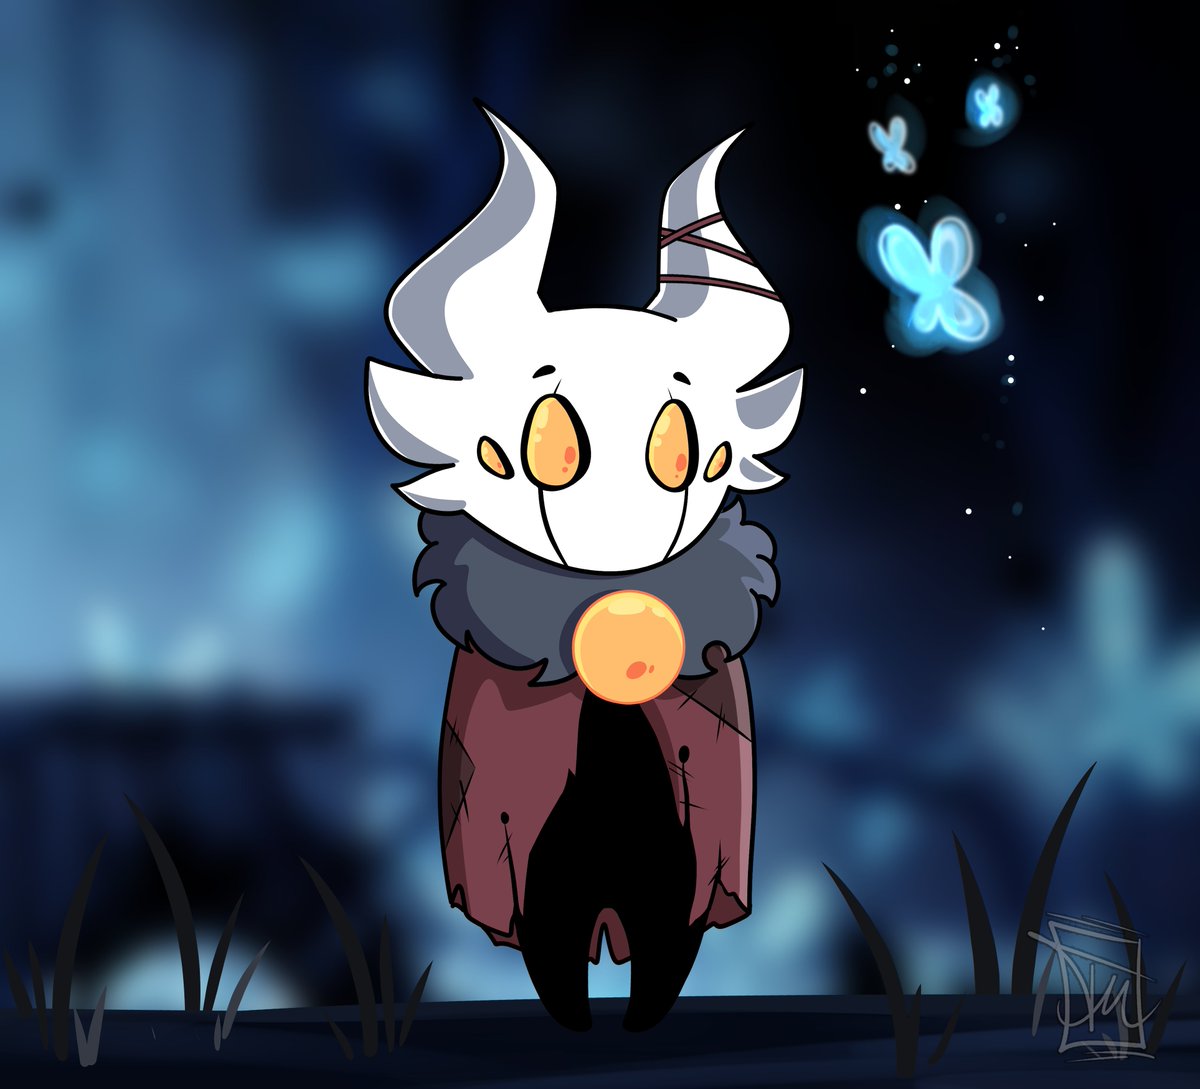 At the moment I am playing Hollow Knight.
And I really love the art style. So I made my own 'Knight'

#hollowknight #hollowknightfanart #hollowknightOC #games #fanart #tintenmeer #art #digitalart #artist #digitalartist #fyp #fypシ #clipstudiopaint #cute